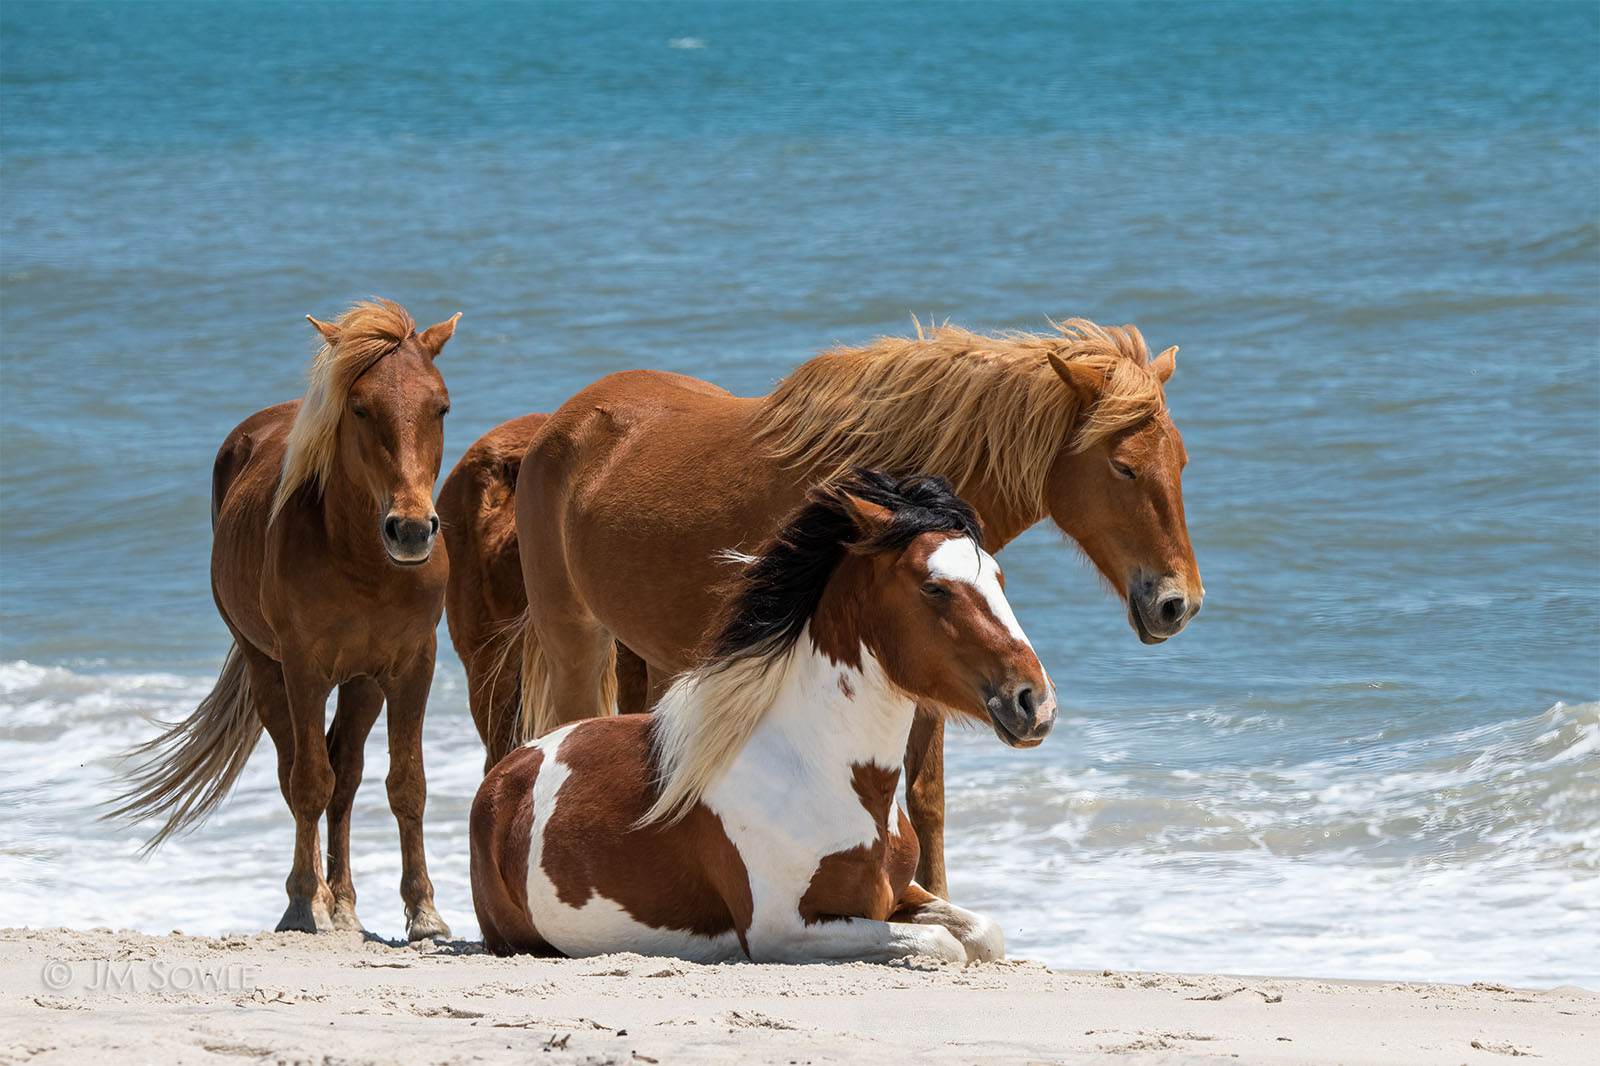 _JMS1137_1600.jpg - On hot days when the bugs are biting the horses, they often go to the ocean for a respite.